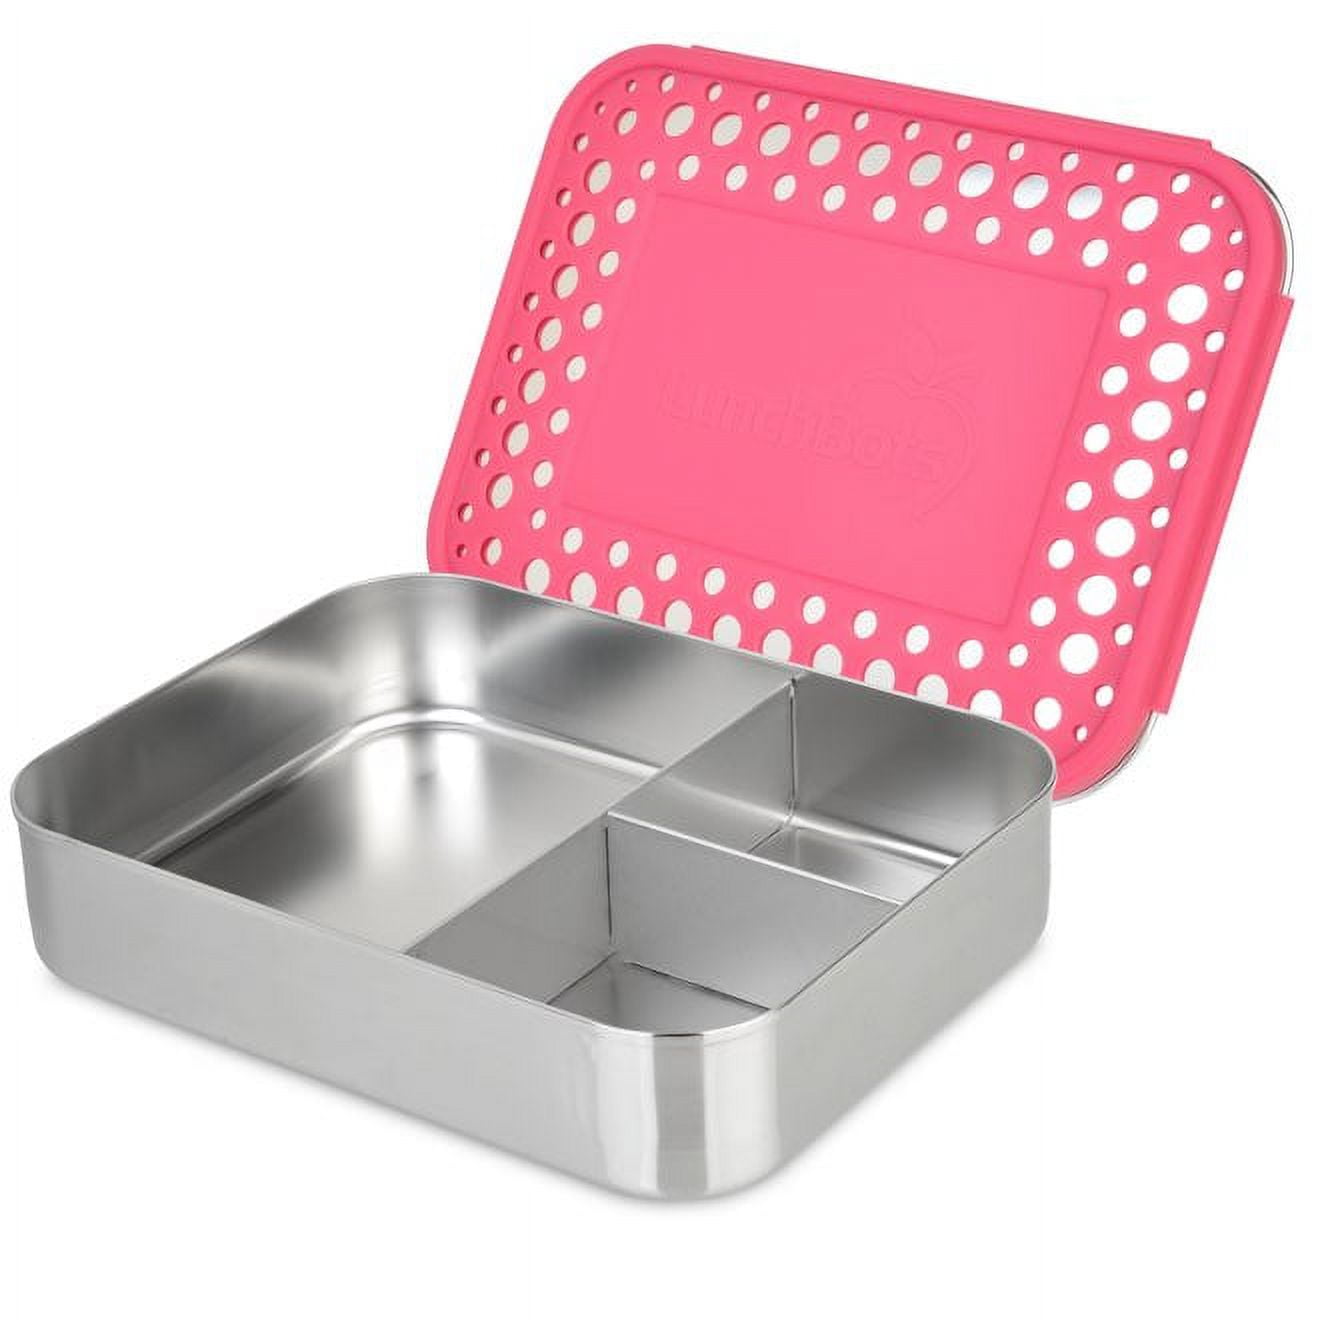 LunchBots Medium Trio II Snack Container - Divided Stainless Steel Food  Container - Three Sections f…See more LunchBots Medium Trio II Snack  Container